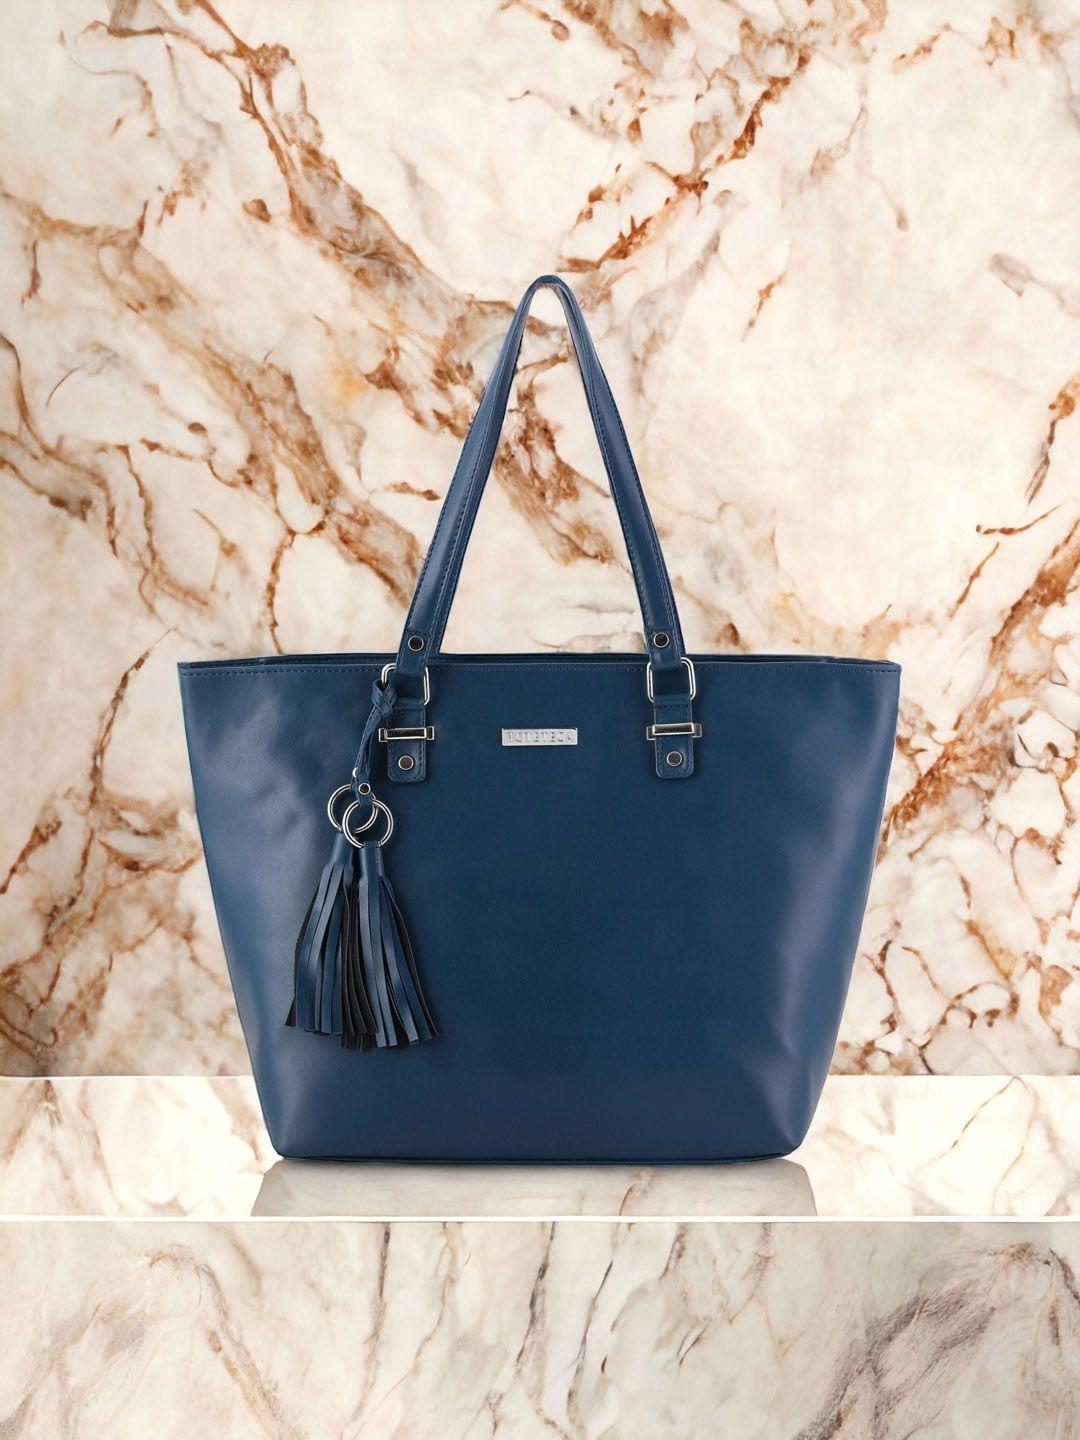 toteteca structured tote bag with tasselled